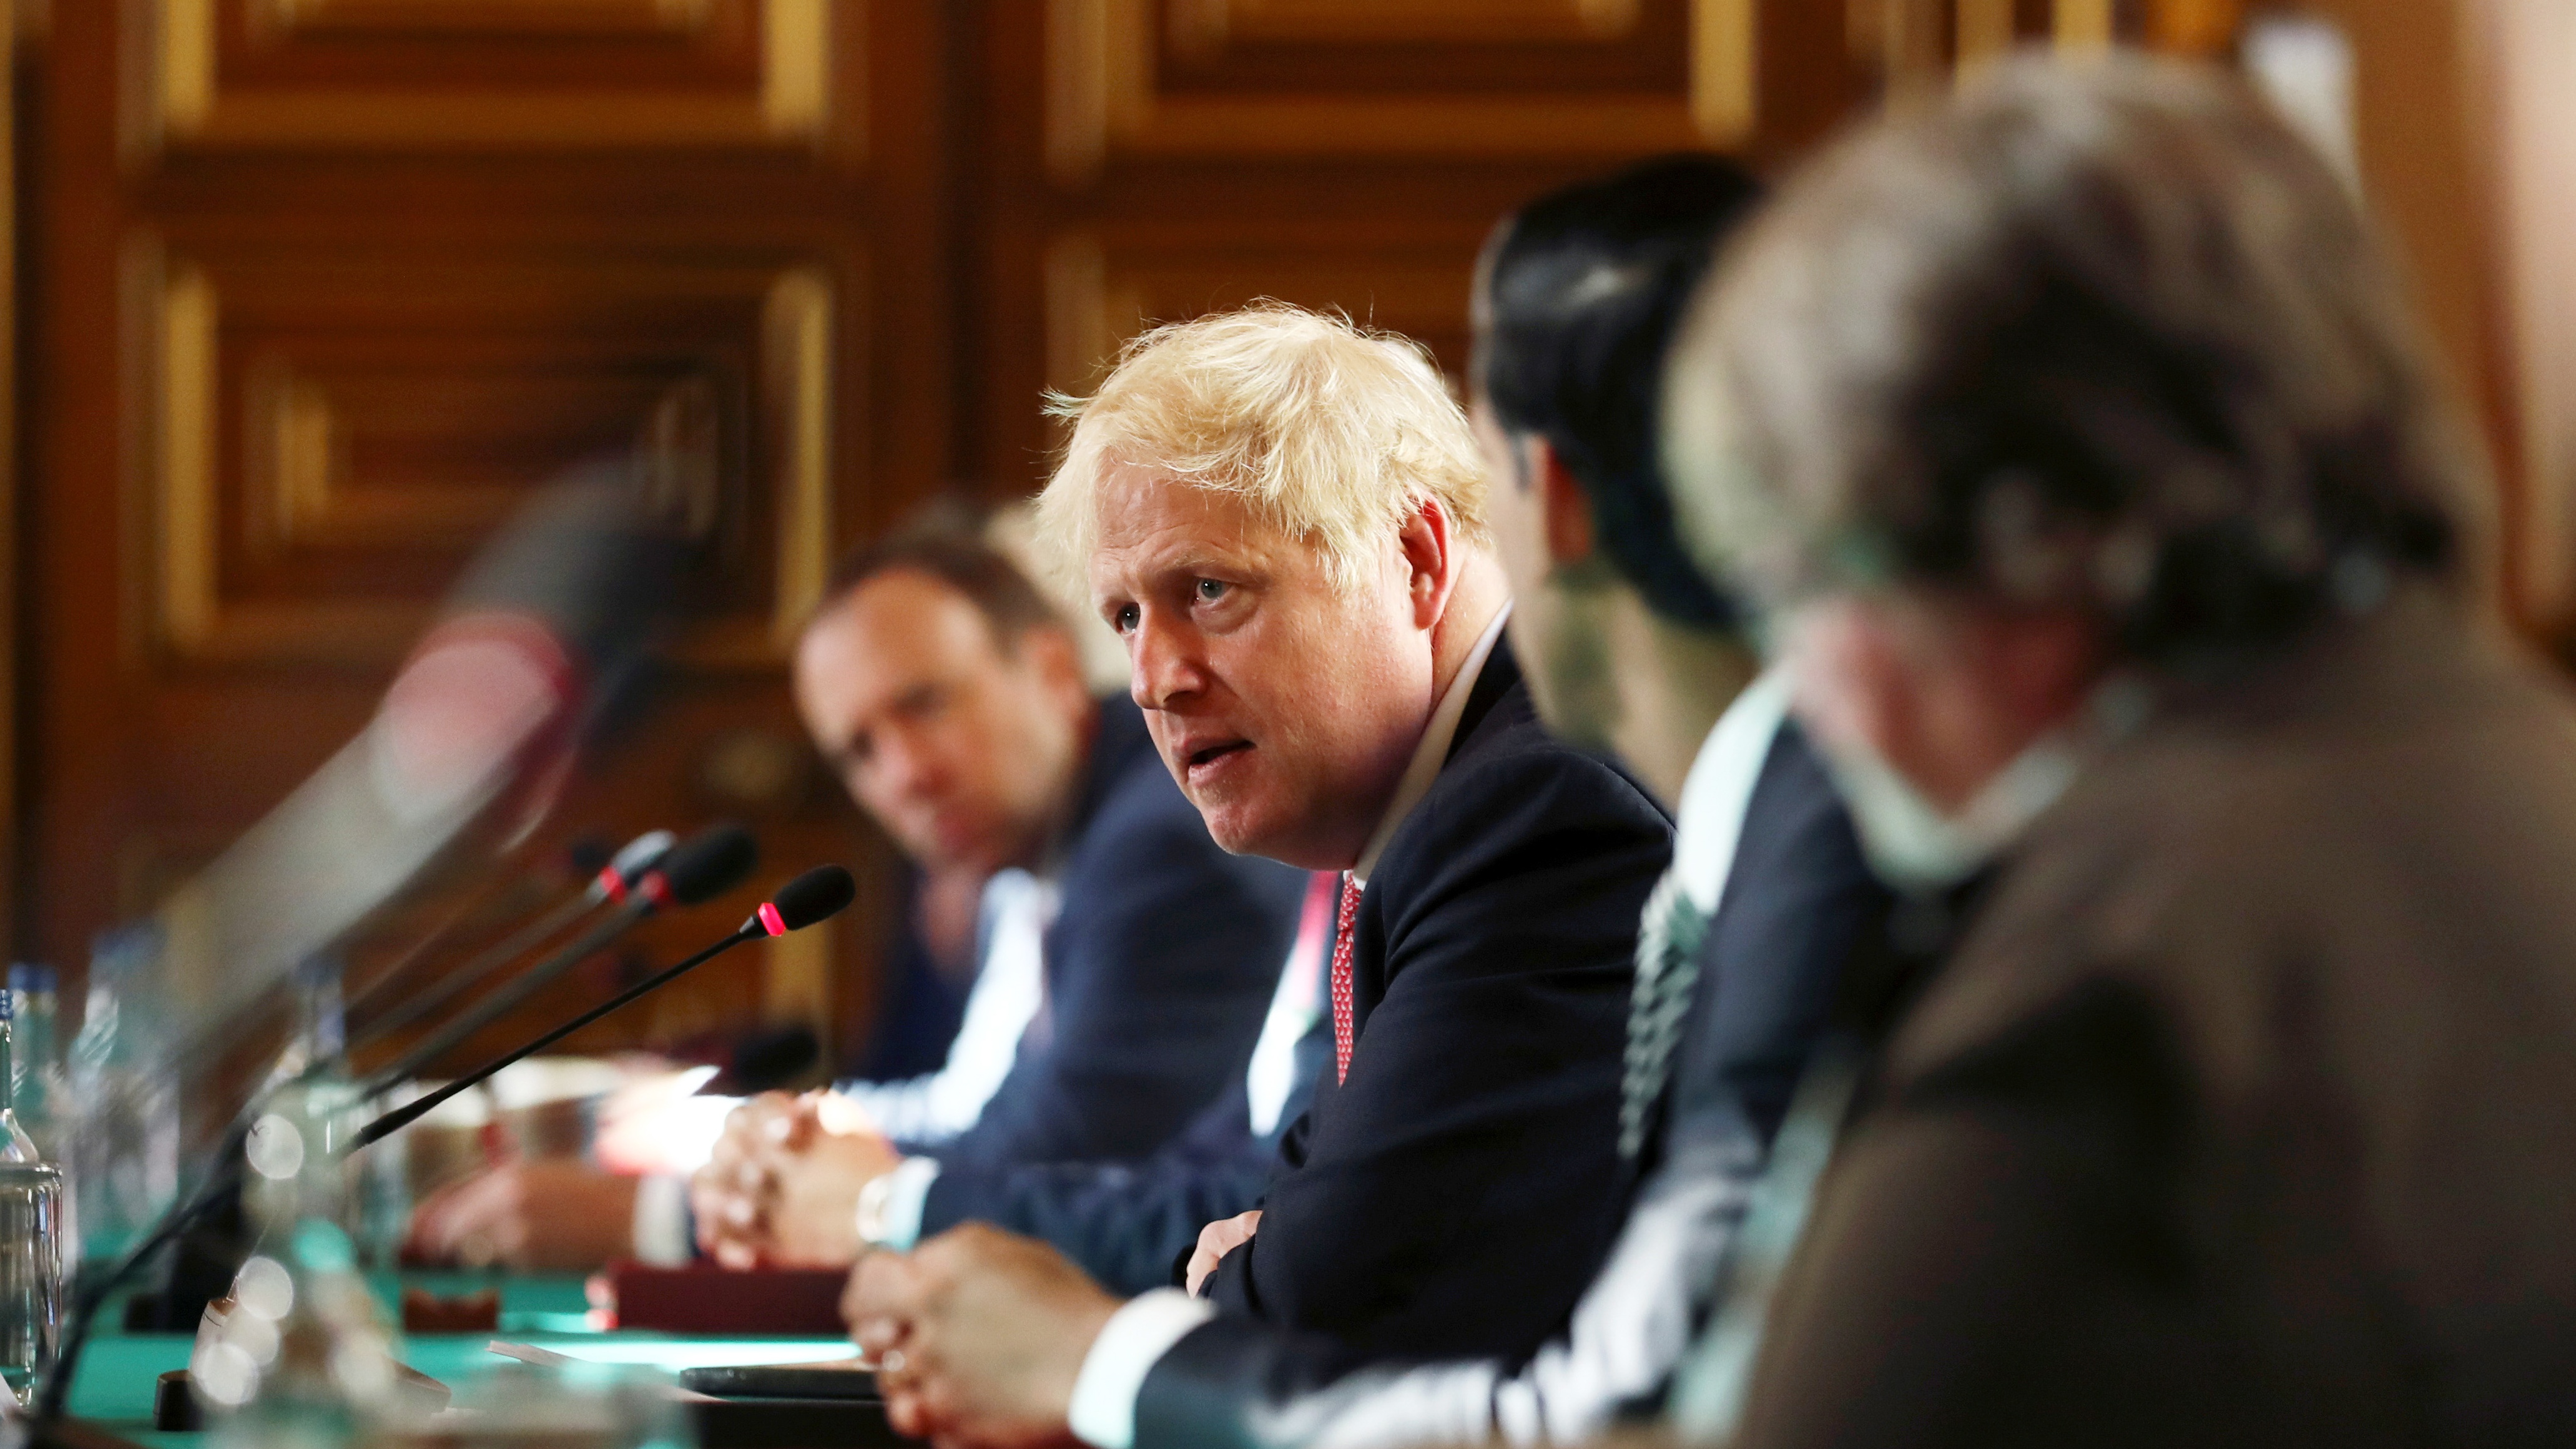 Boris Johnson chairs a socially distanced meeting of the cabinet.